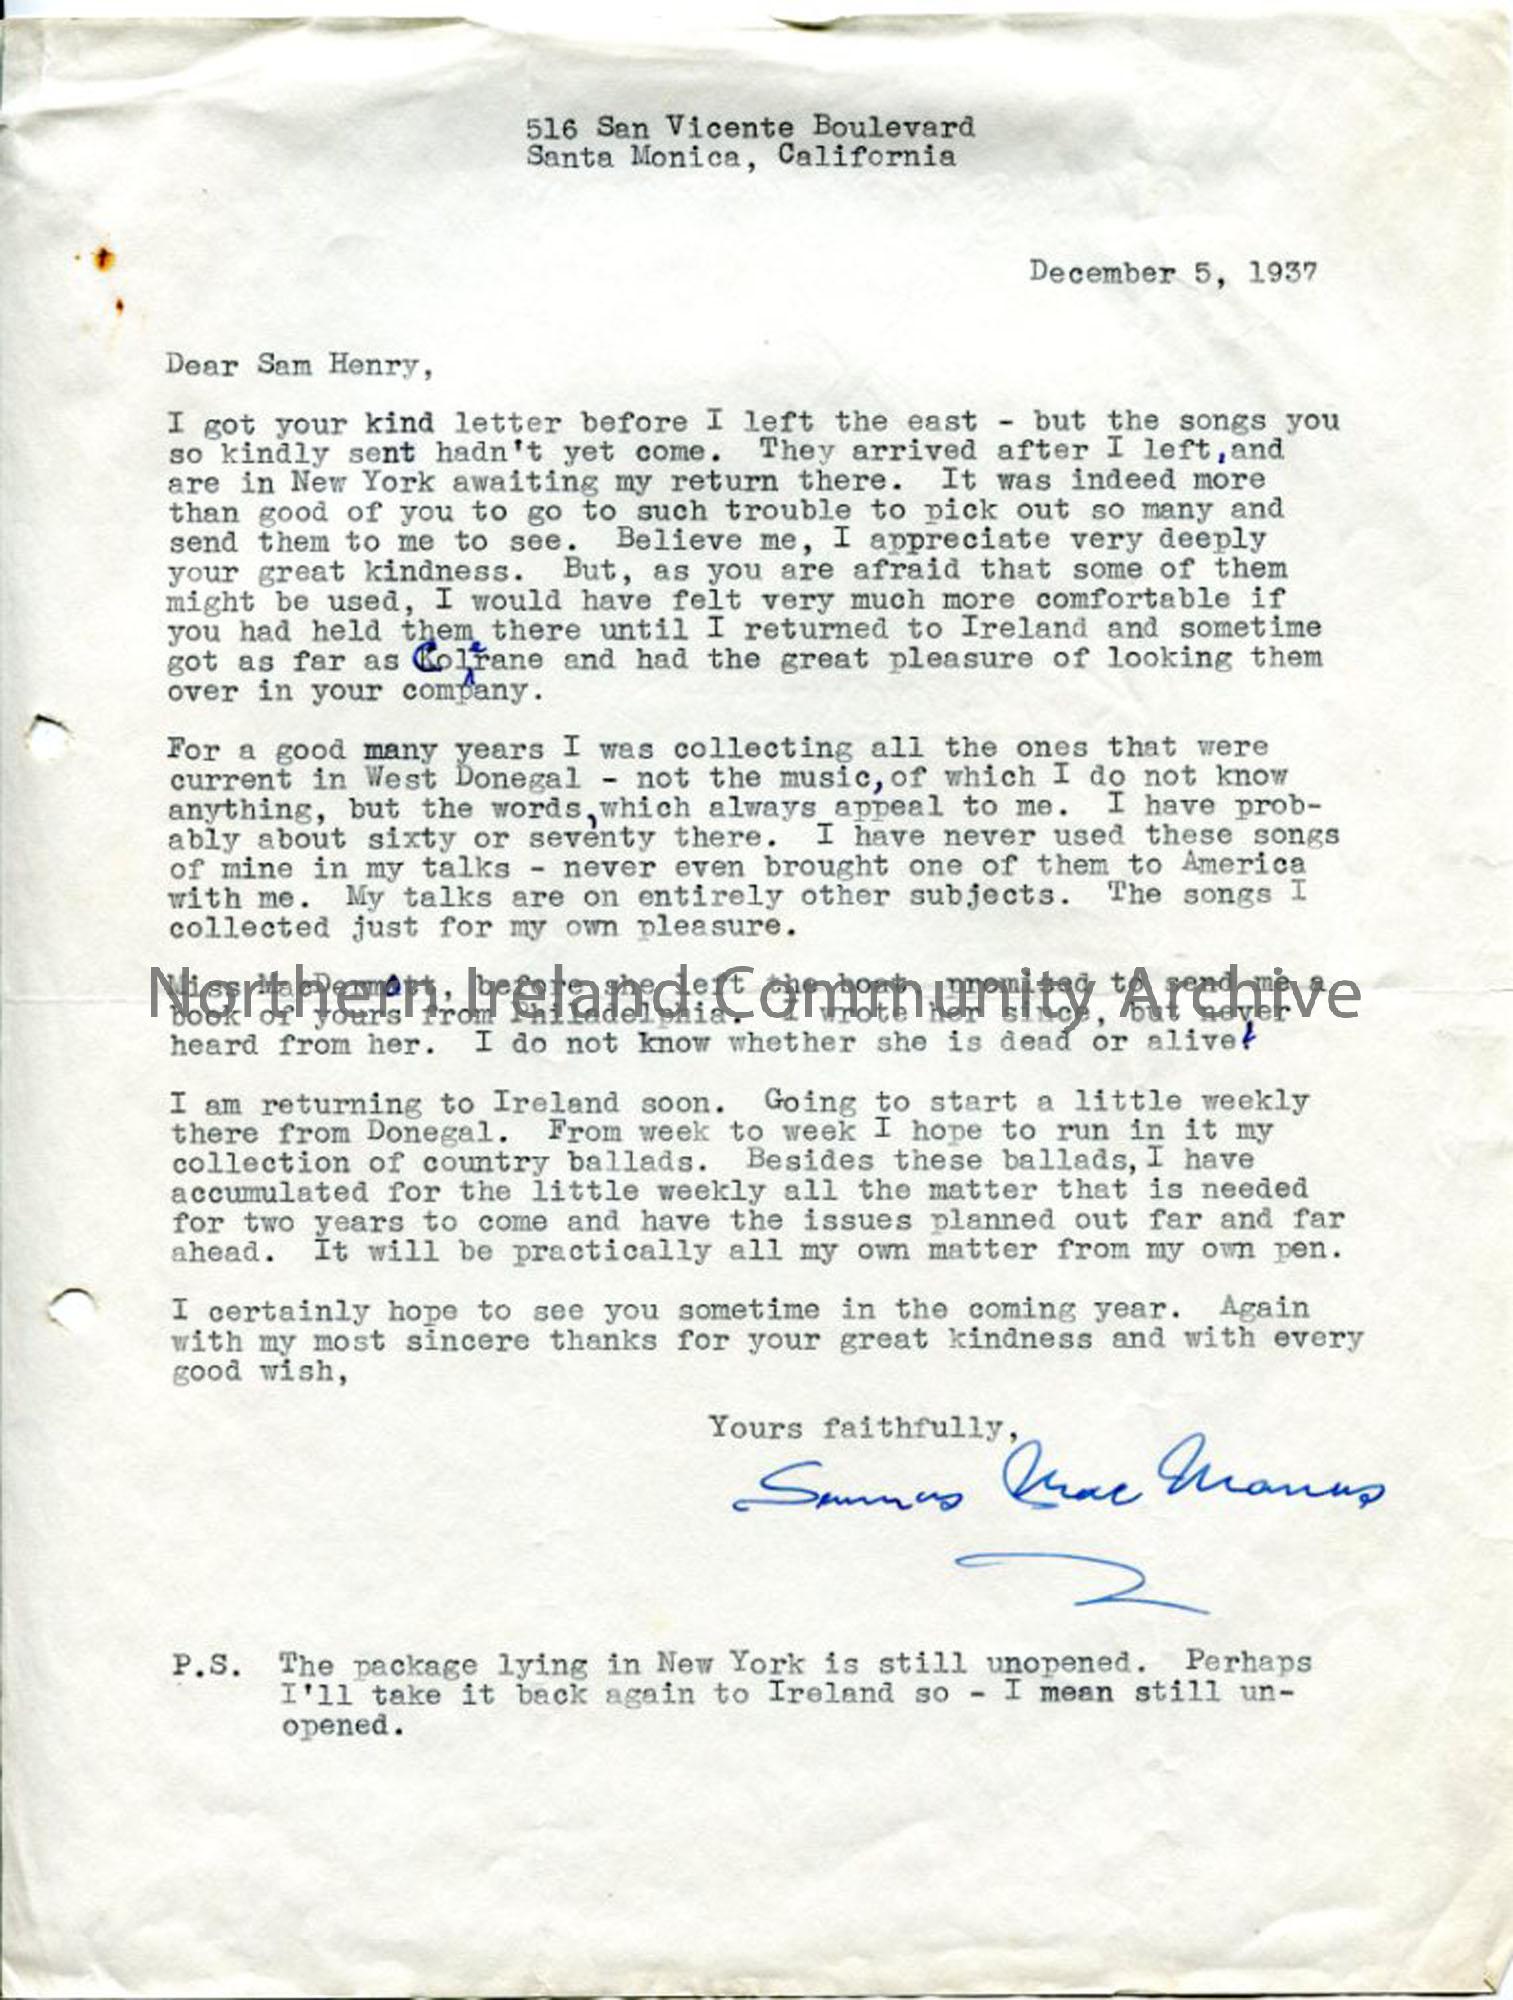 Typed letter from California 11th June, 1937